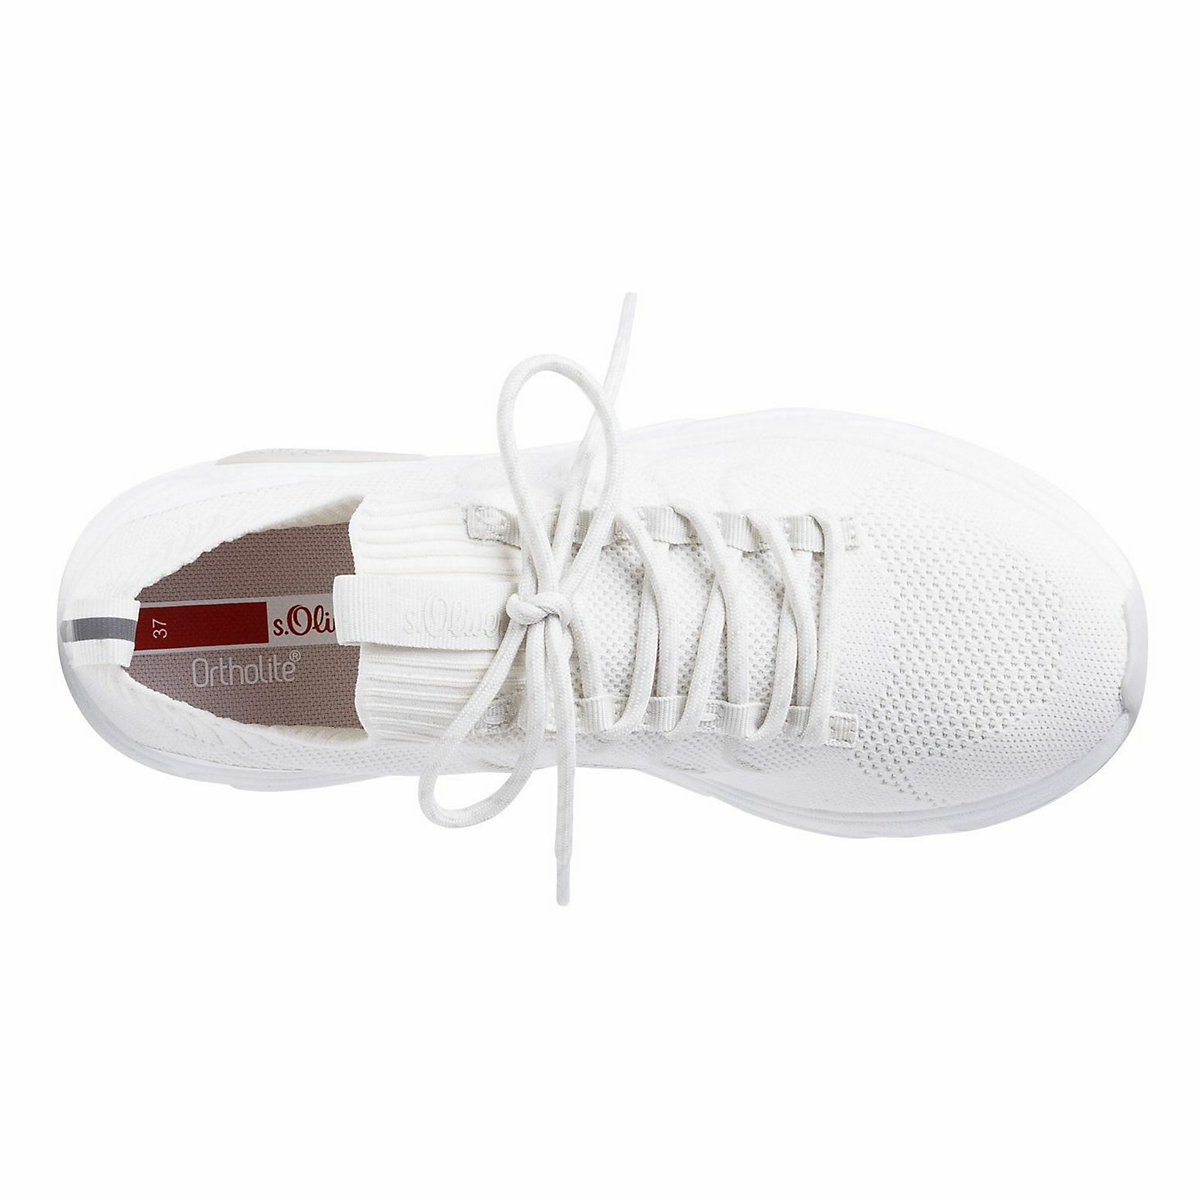 s.Oliver s.Oliver Sneaker Sneakers Low weiß